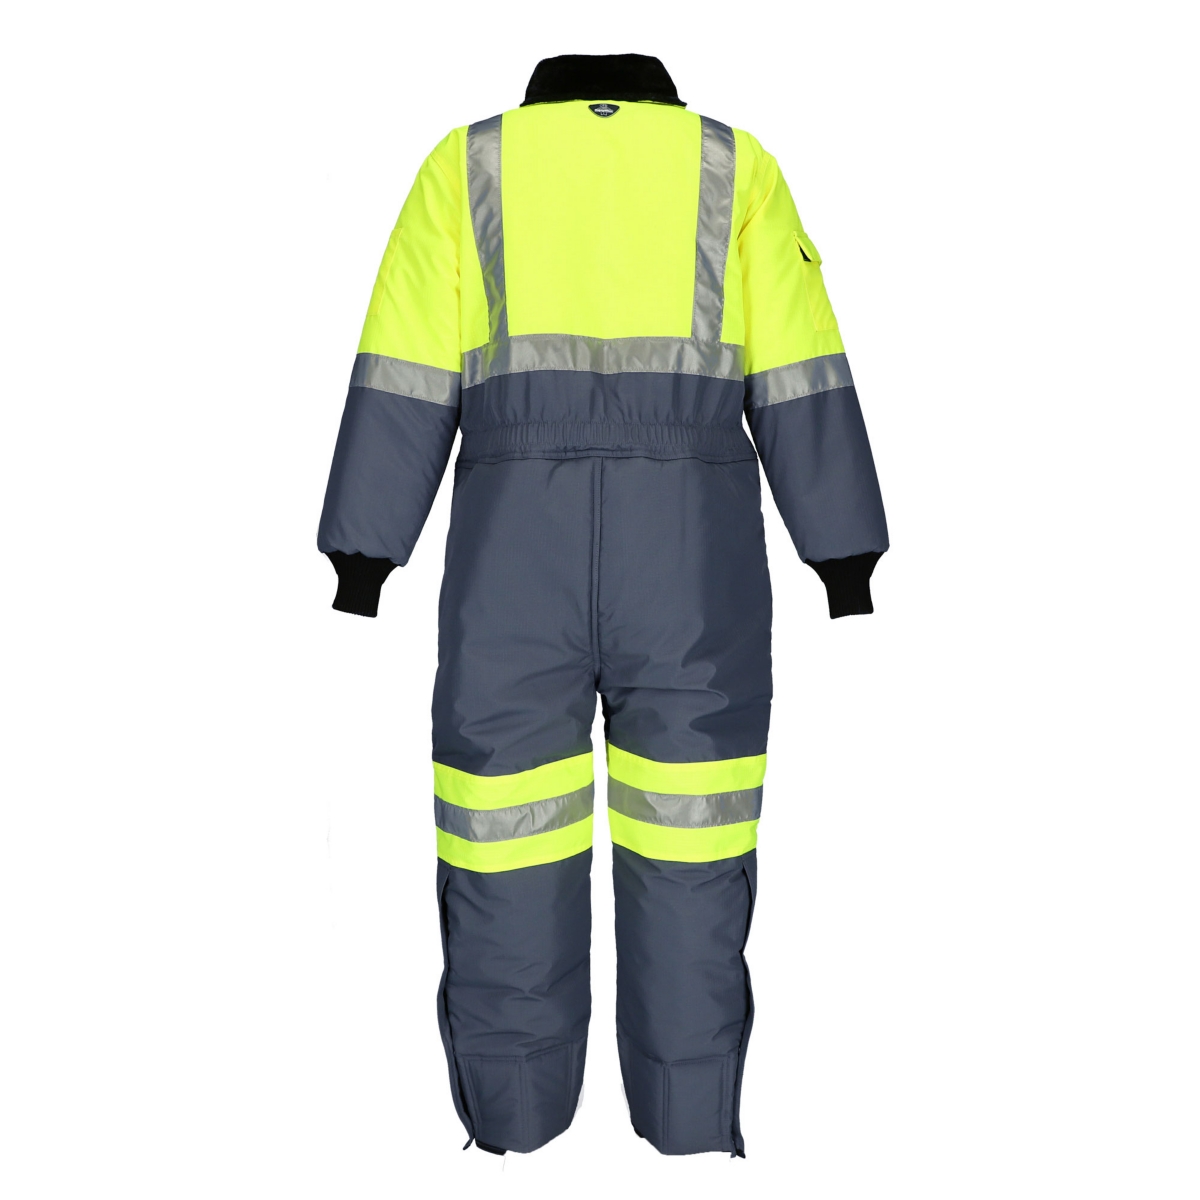 Refrigiwear Freezer Edge Insulated Coveralls (lime Gray, X-large